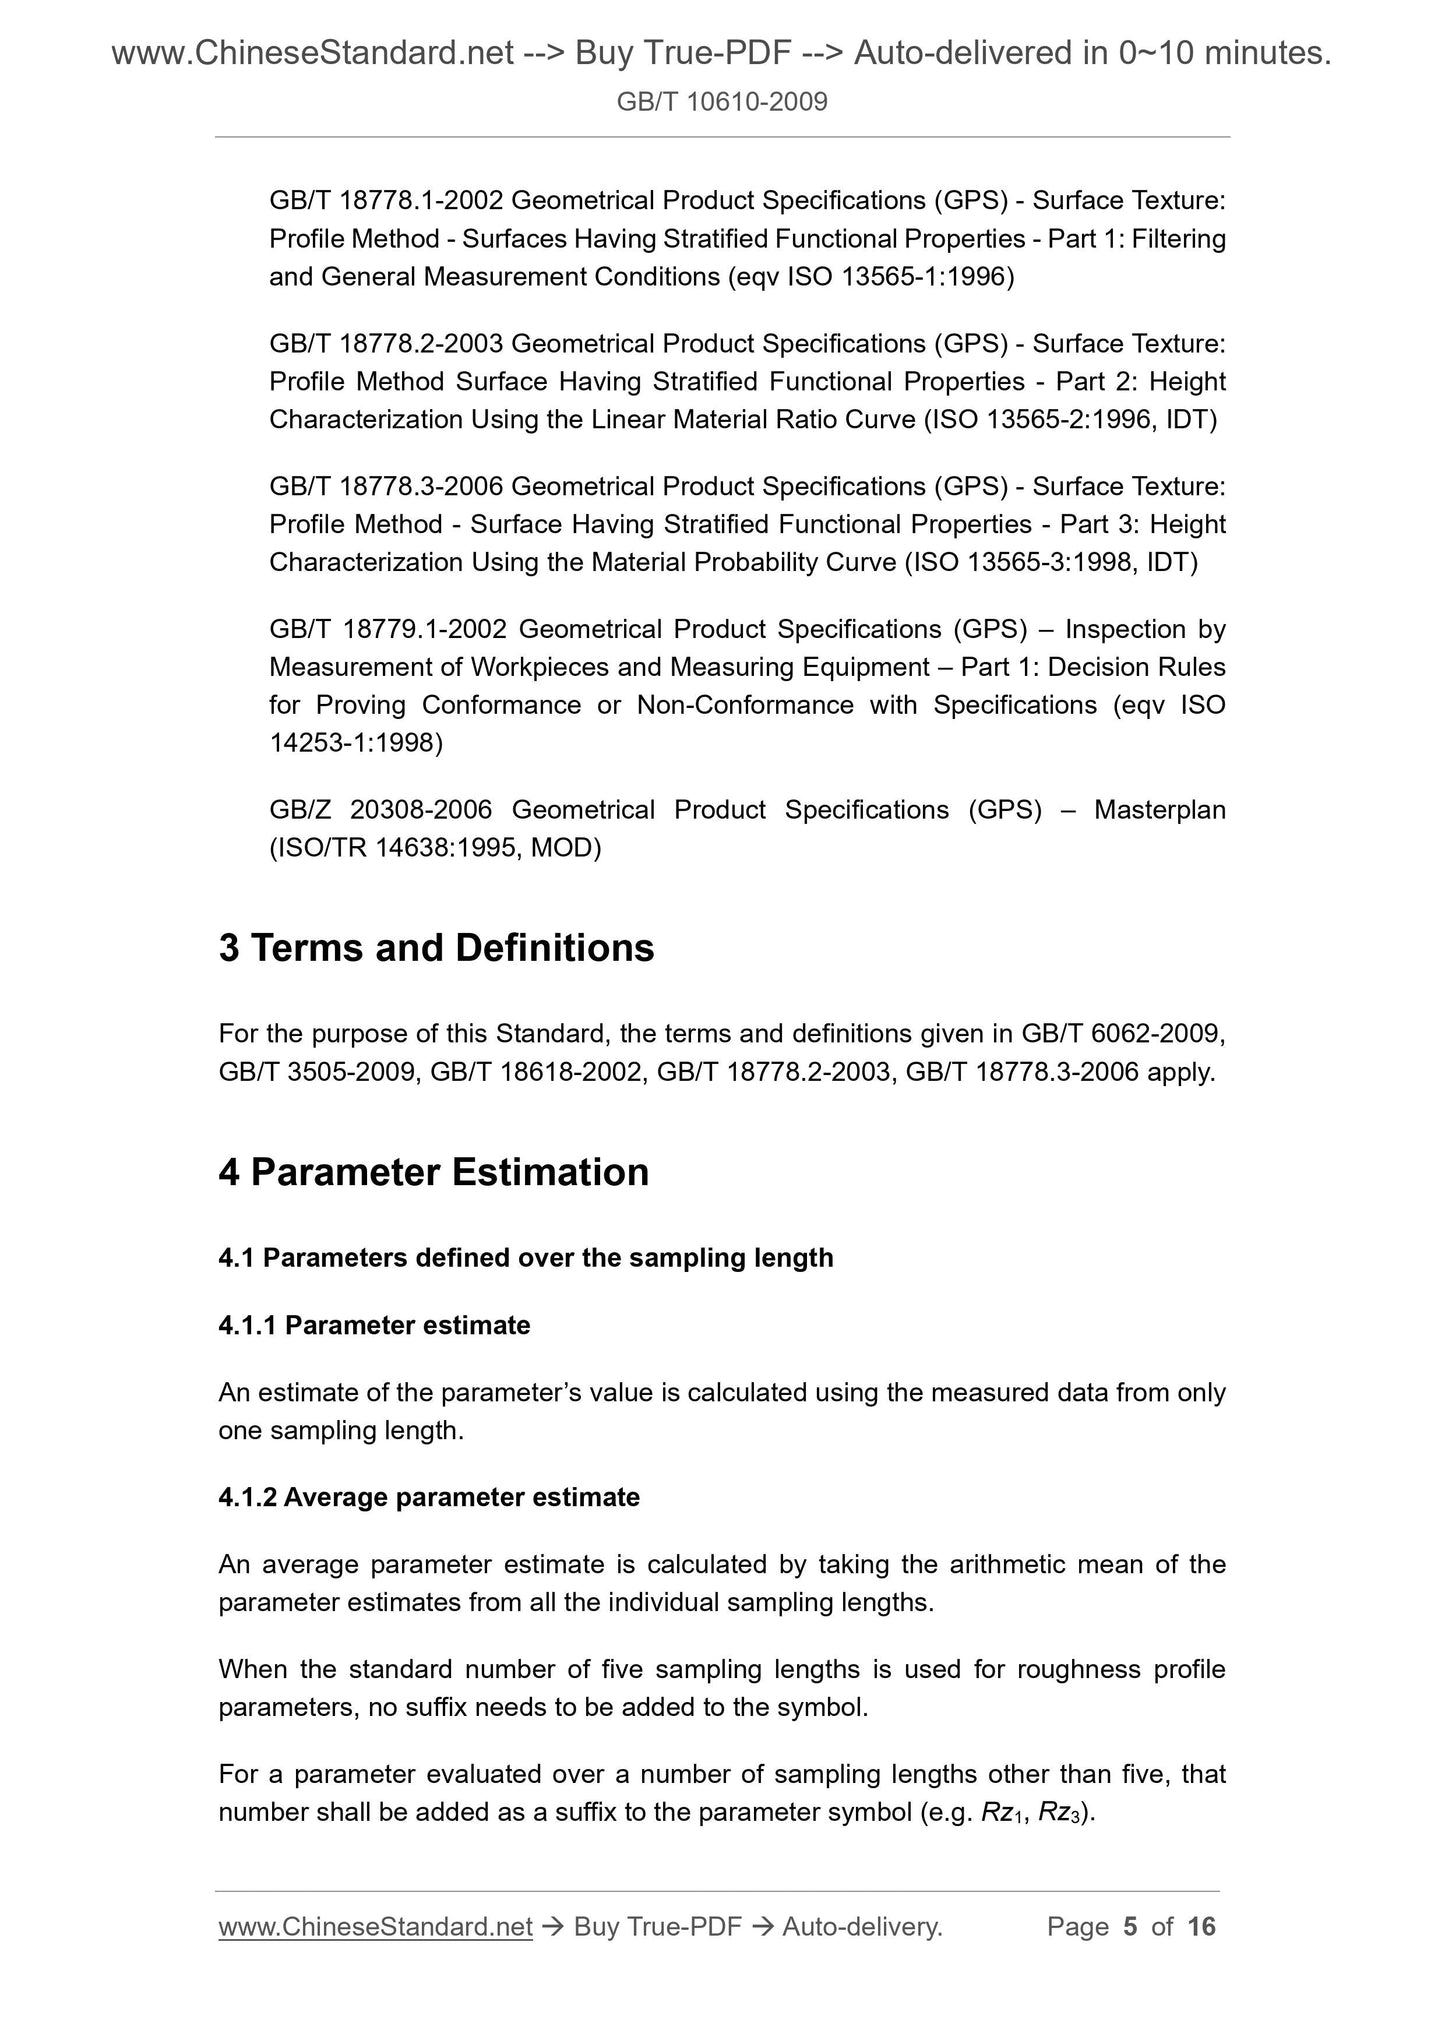 GB/T 10610-2009 Page 5